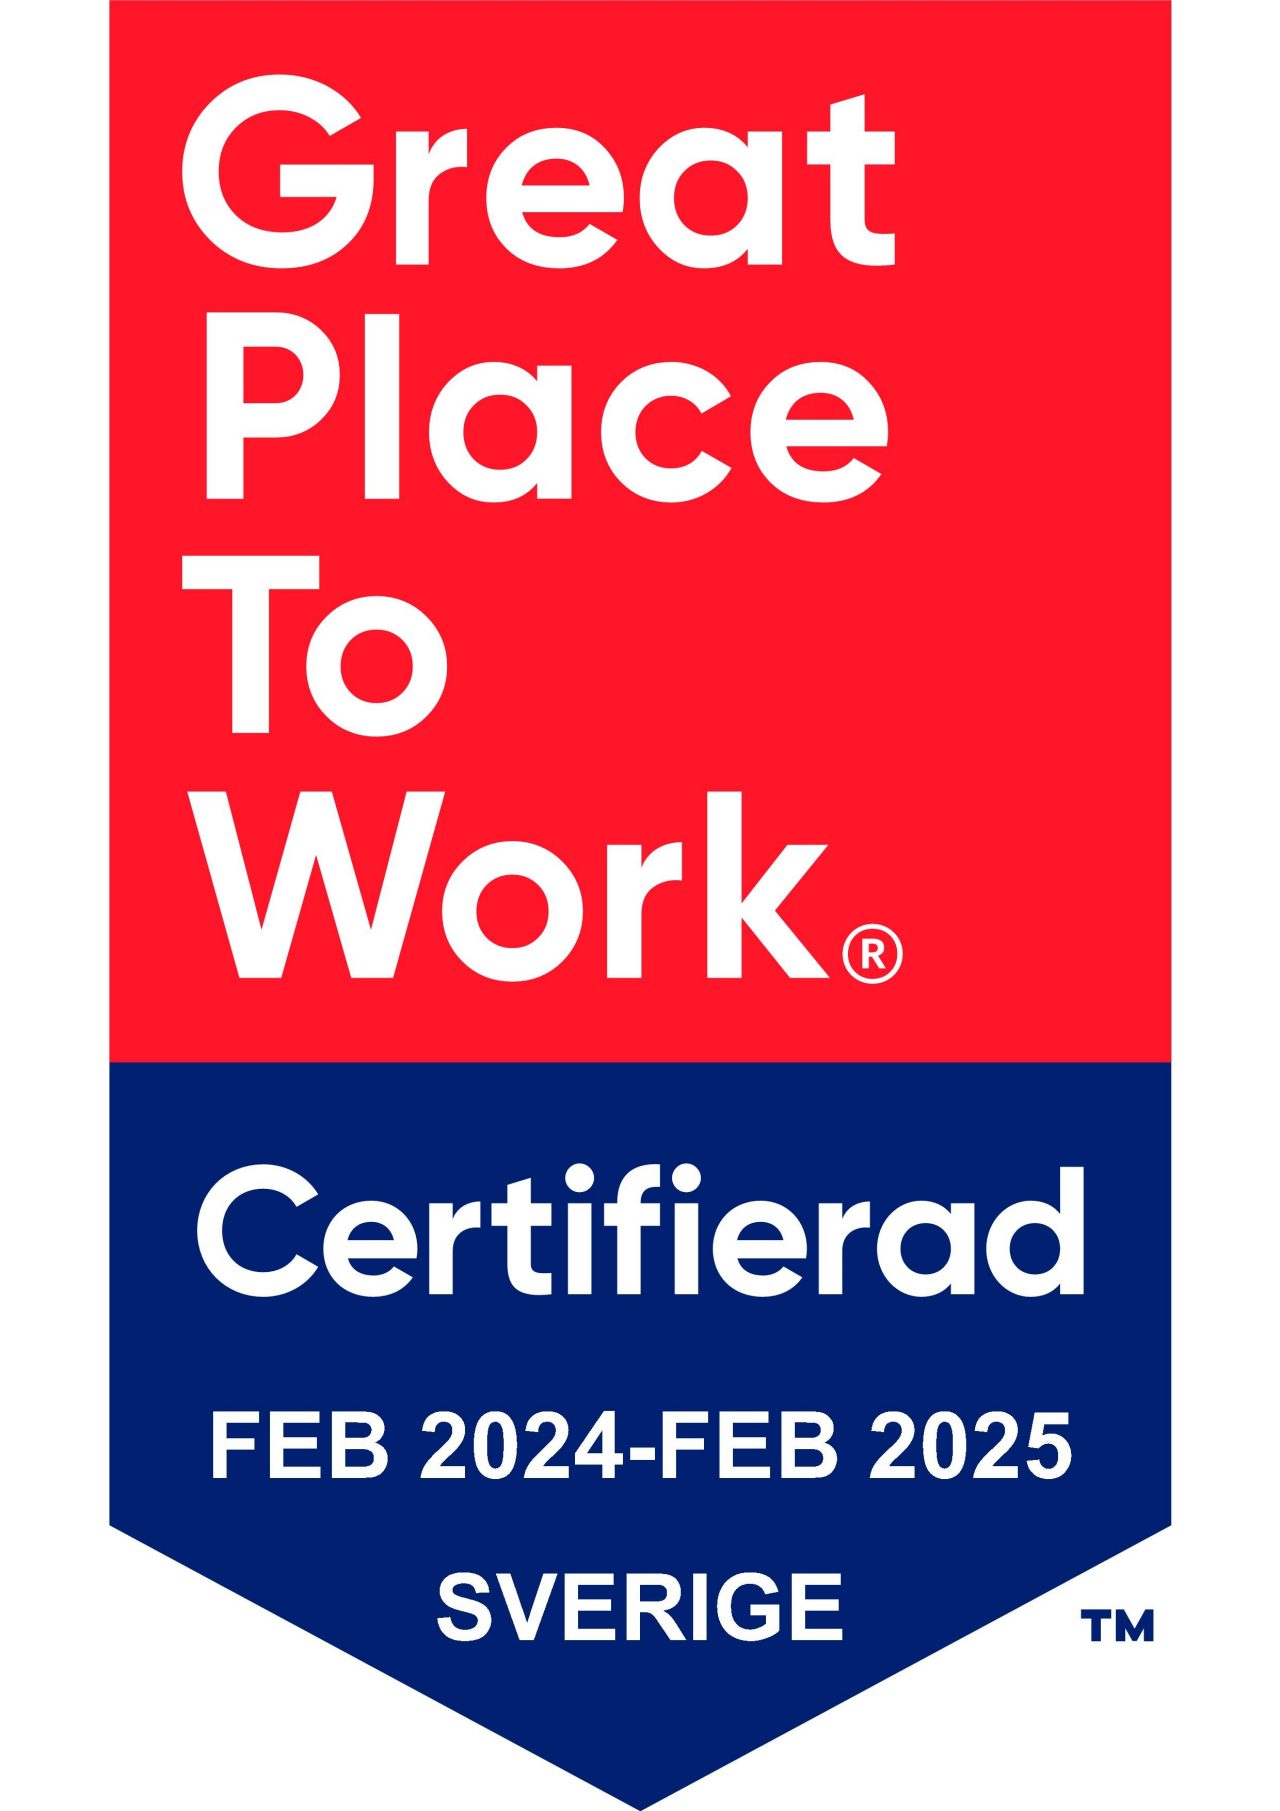 Great Place to Work Certification - Sweden